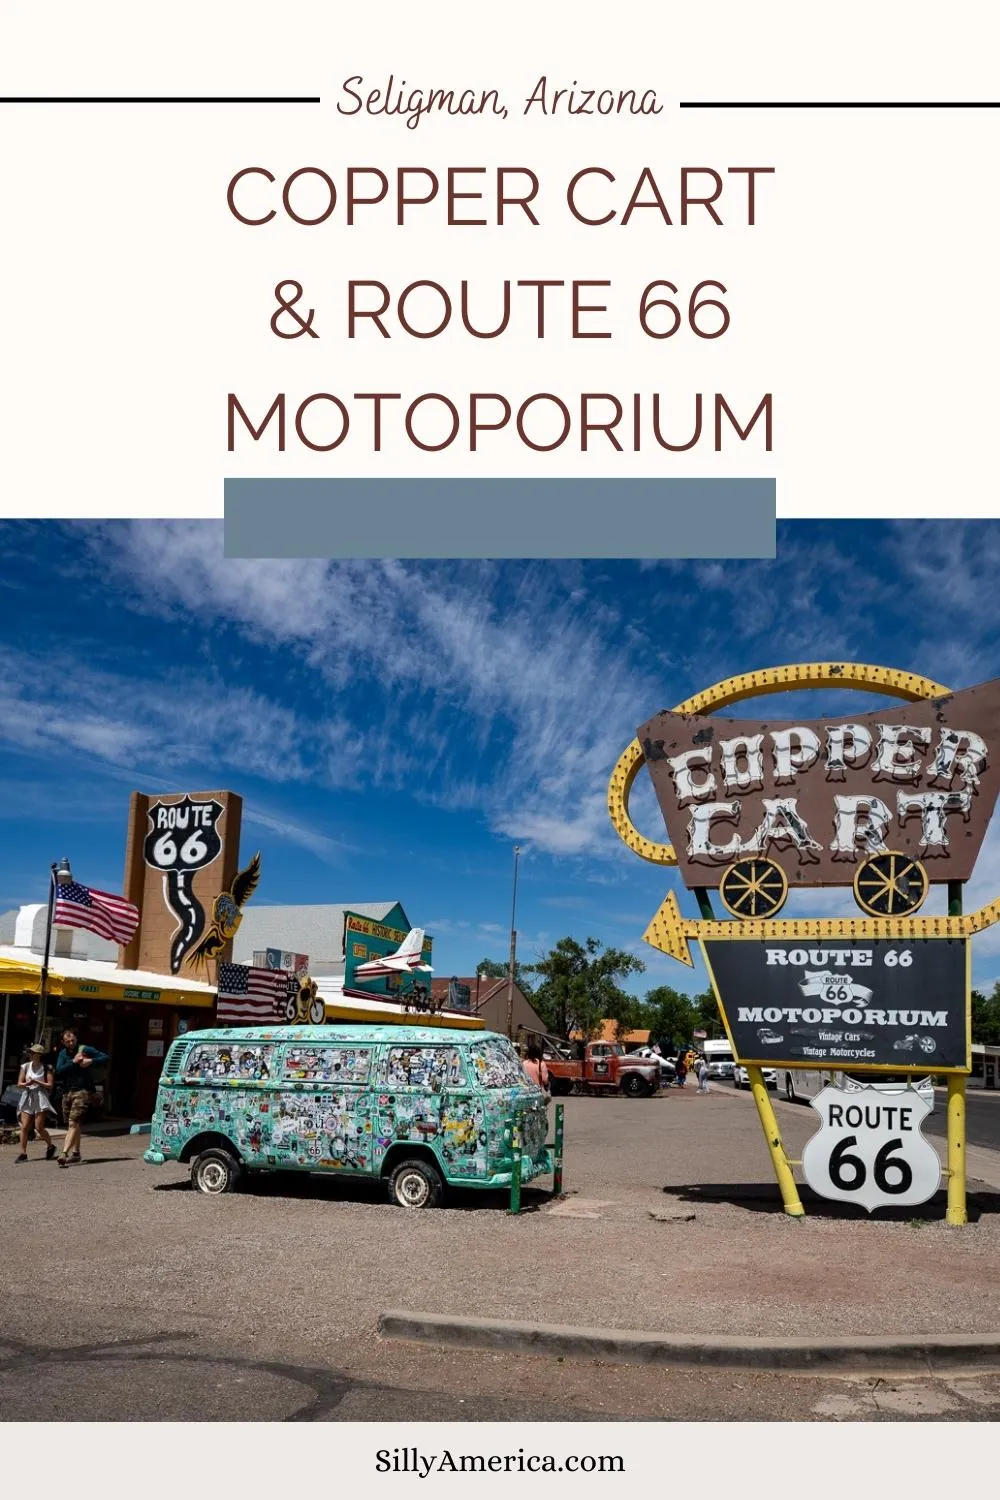 Known for its iconic neon sign and great Mexican food, the Copper Cart in Seligman, Arizona was once one of the most popular Route 66 restaurants in town. You can no longer get food at this establishment, but you can still come inside. The building is now home to the Route 66 Motoporium. The Route 66 museum features motorcycles and other vintage cars - both inside and out! Add this roadside attraction to your Route 66 road trip itinerary! #Route66 #Route66RoadTrip #RoadsideAttraction #Arizona